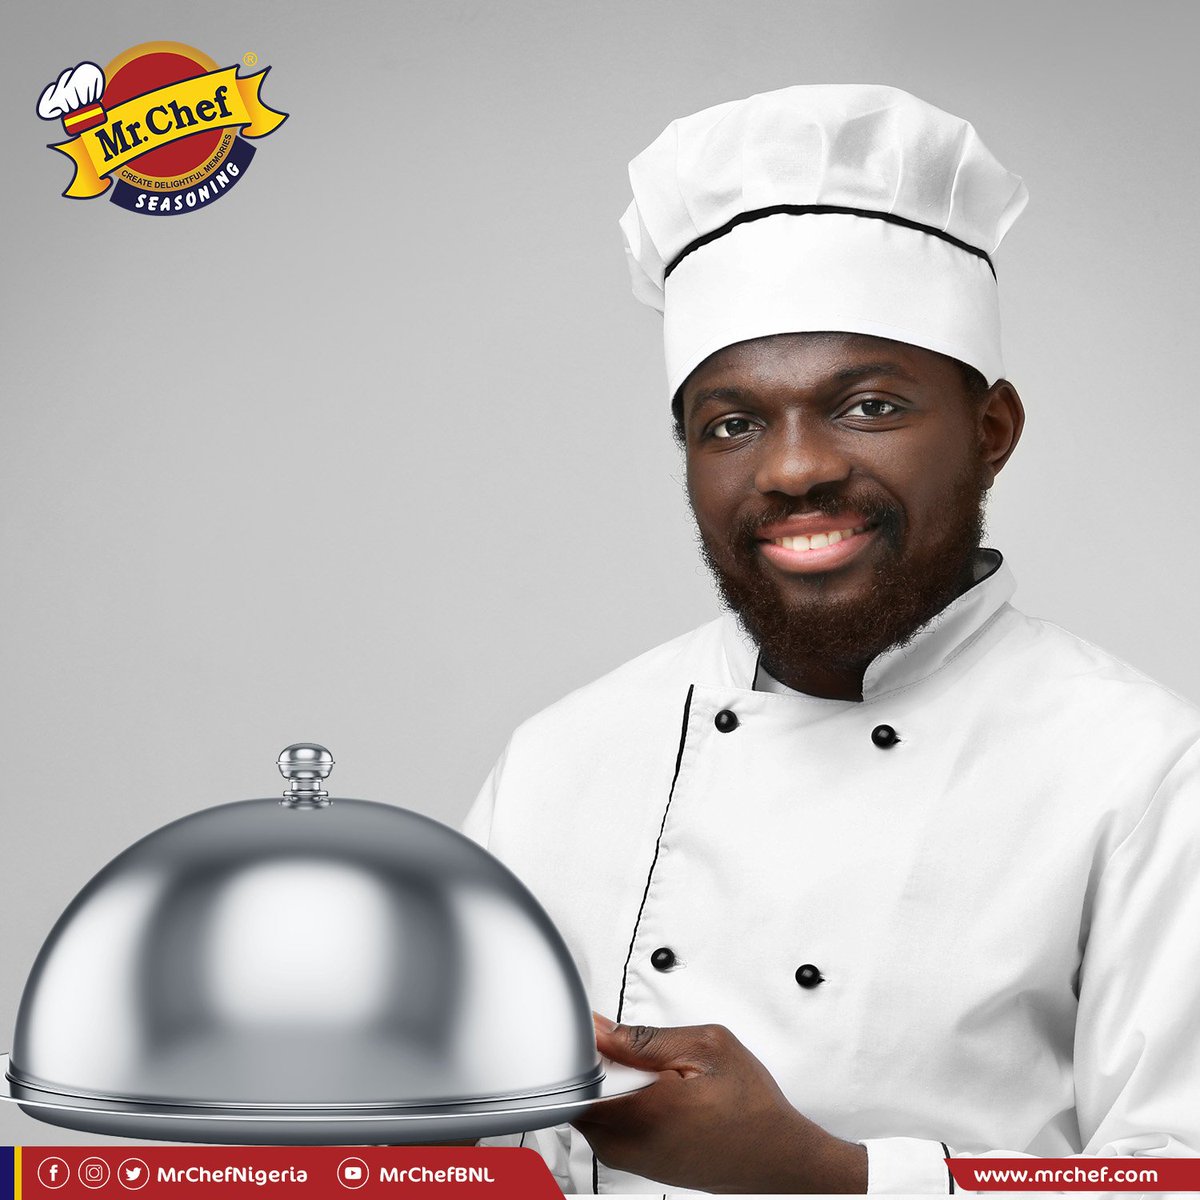 Modernisere Den aktuelle Perversion Mr. Chef on Twitter: "Every Chef has his/her favorite ingredient of choice,  but to truly make a meal a memory one, you need to use Mr. Chef seasoning.  #DelightfulMemories #MrChefNigeria https://t.co/4TVXqsYuc4" /